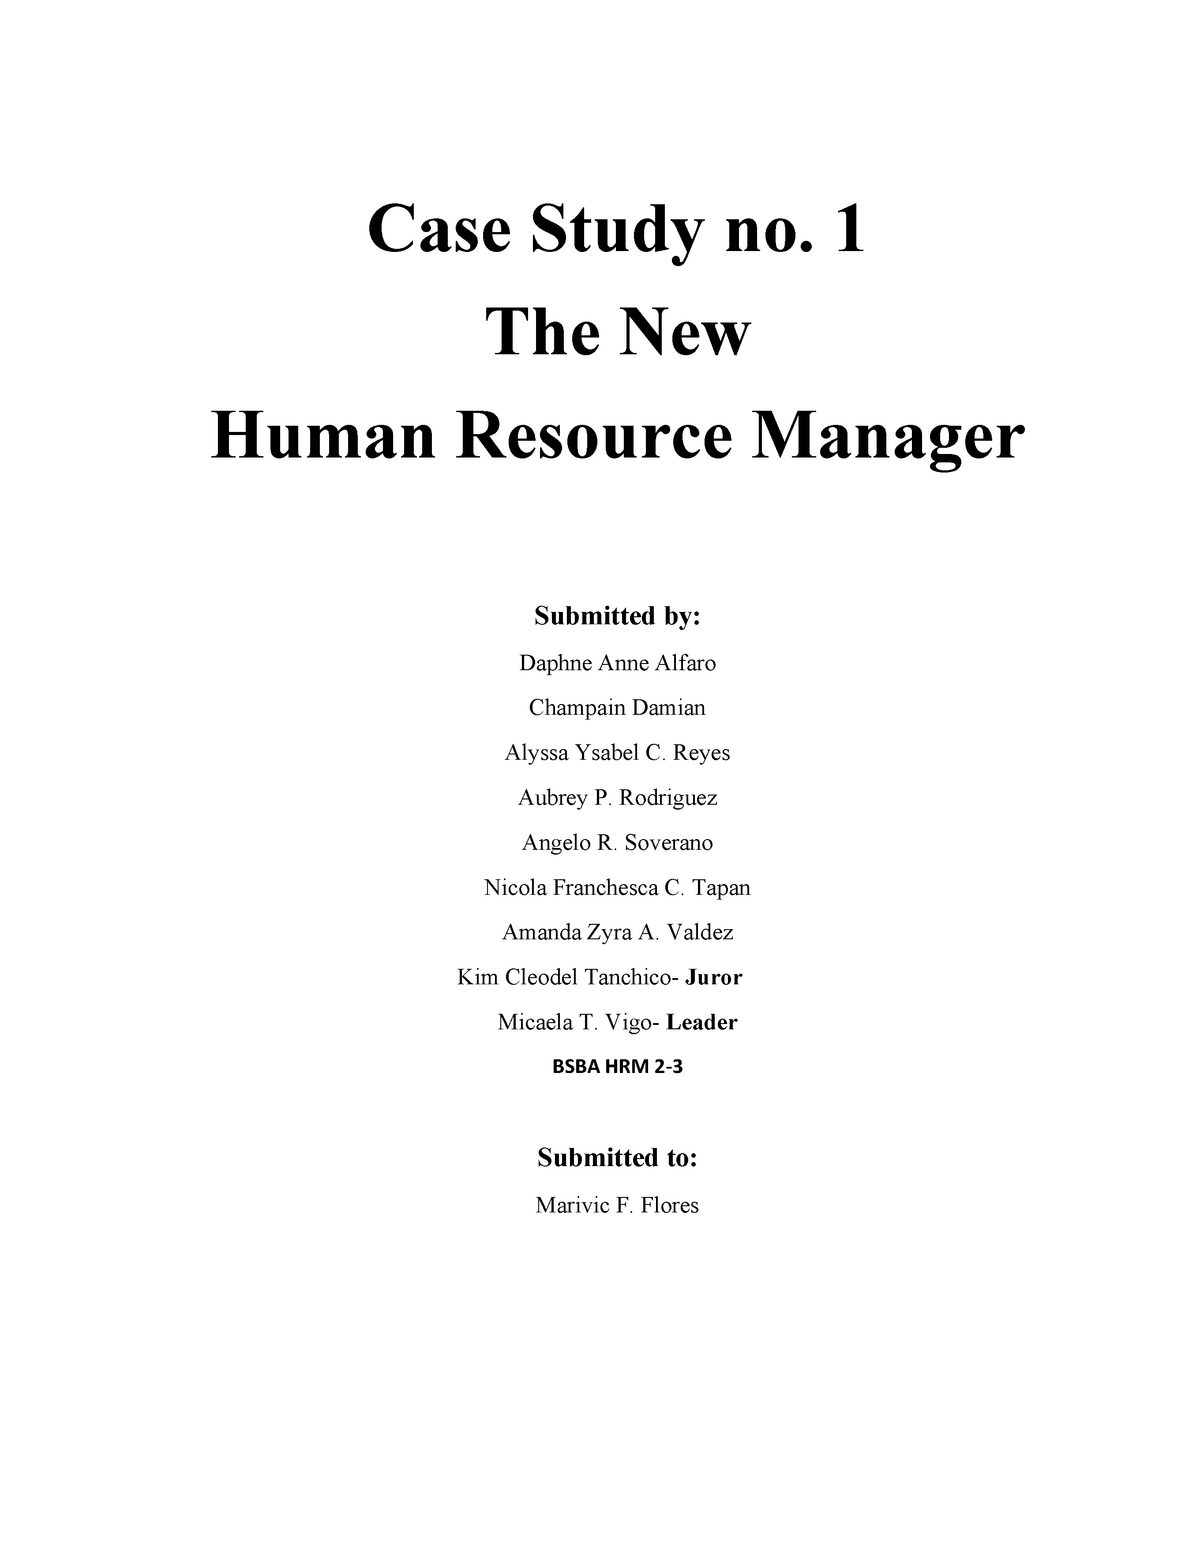 case study of the new human resource manager